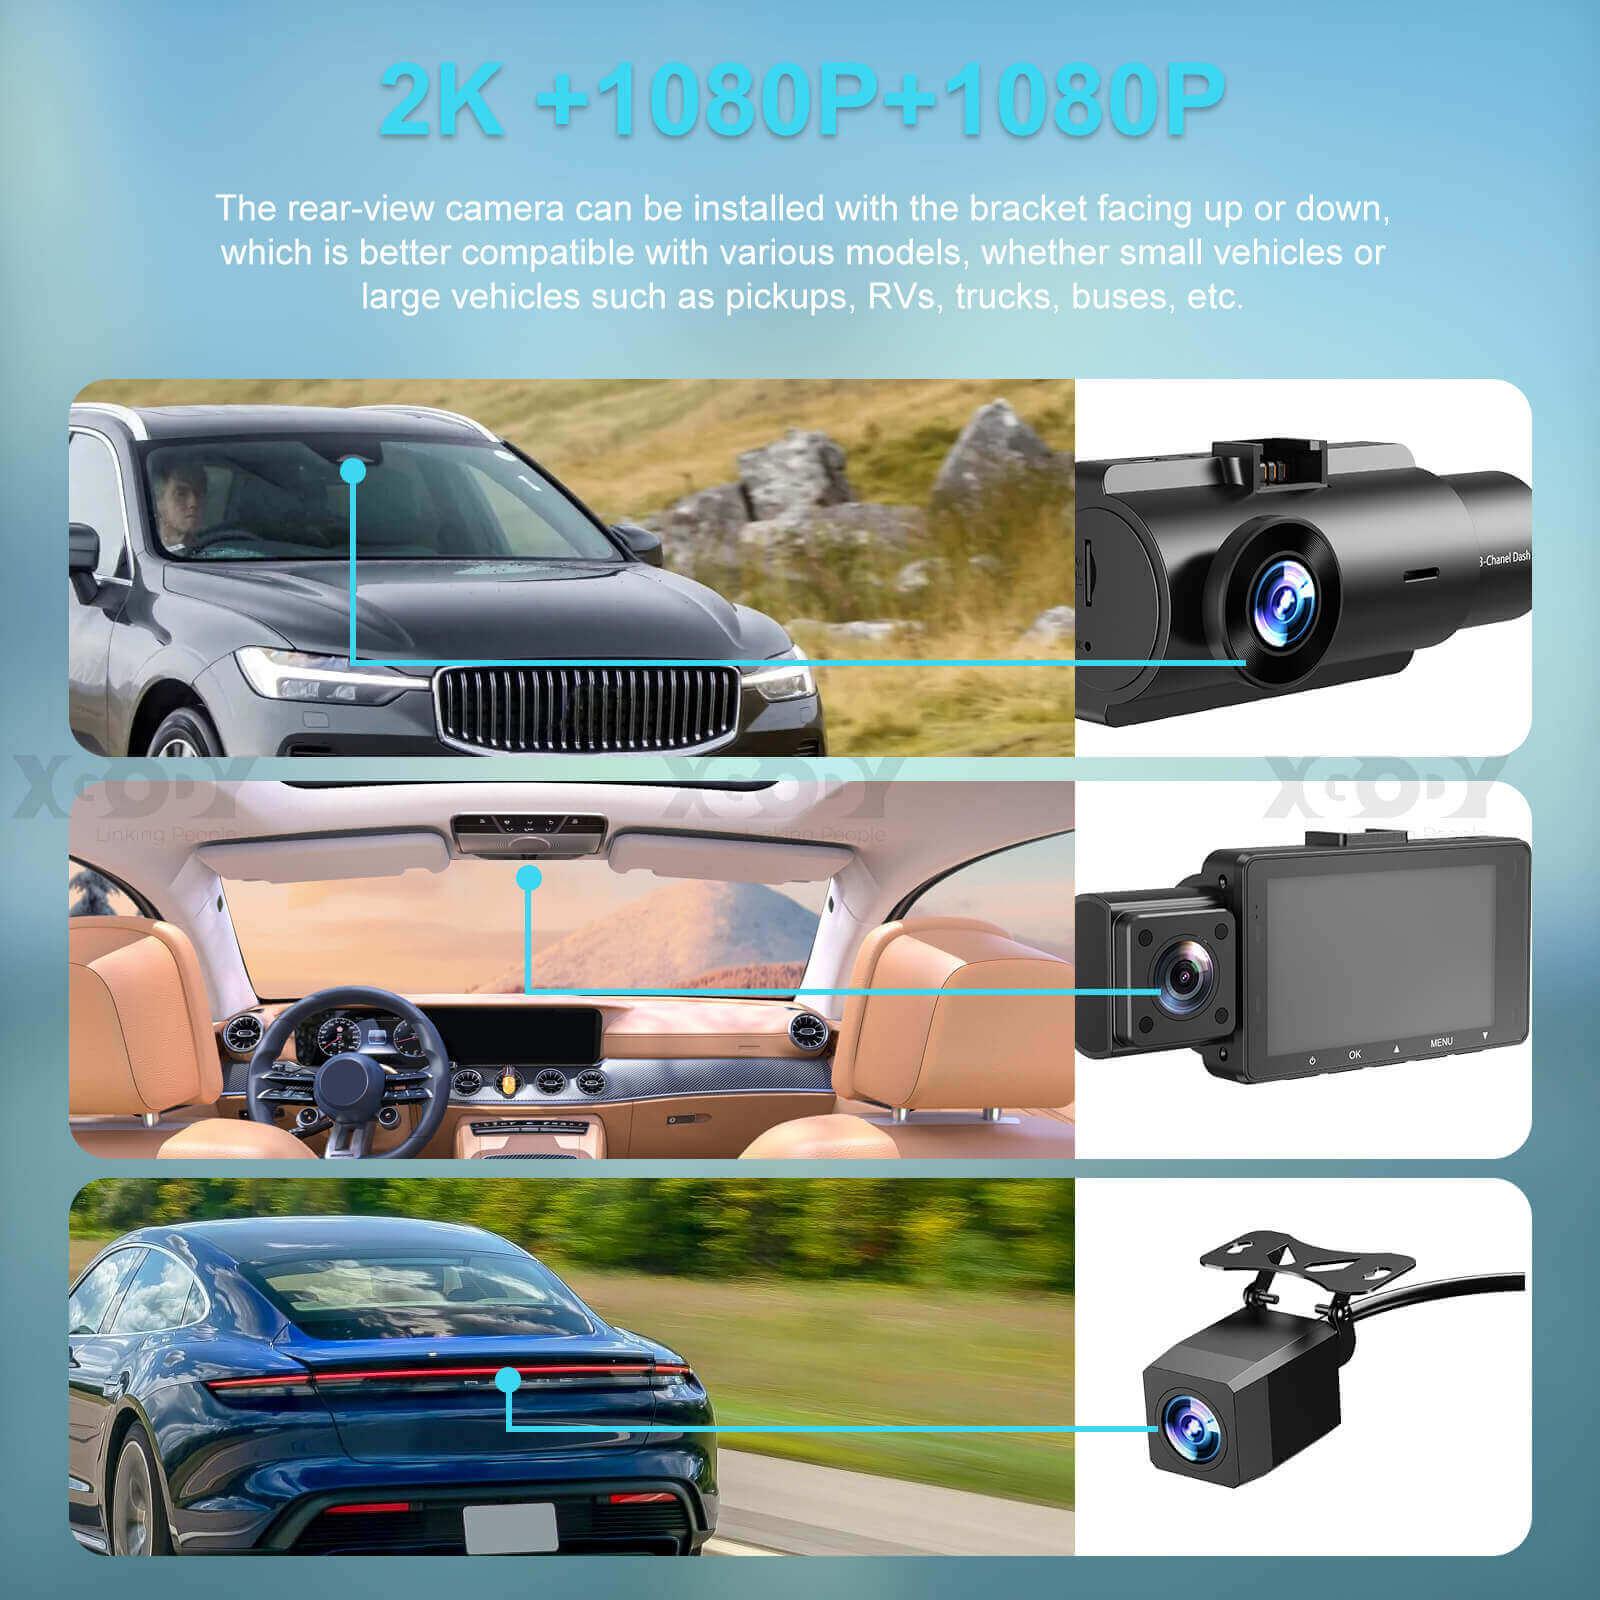 Cost-effective and Most worthwhile XGODY Q18 Triple | Lens Dash Cam | 2K Front + Dual 1080P Rear, 24-Hour Monitoring, Night Vision - XGODY 